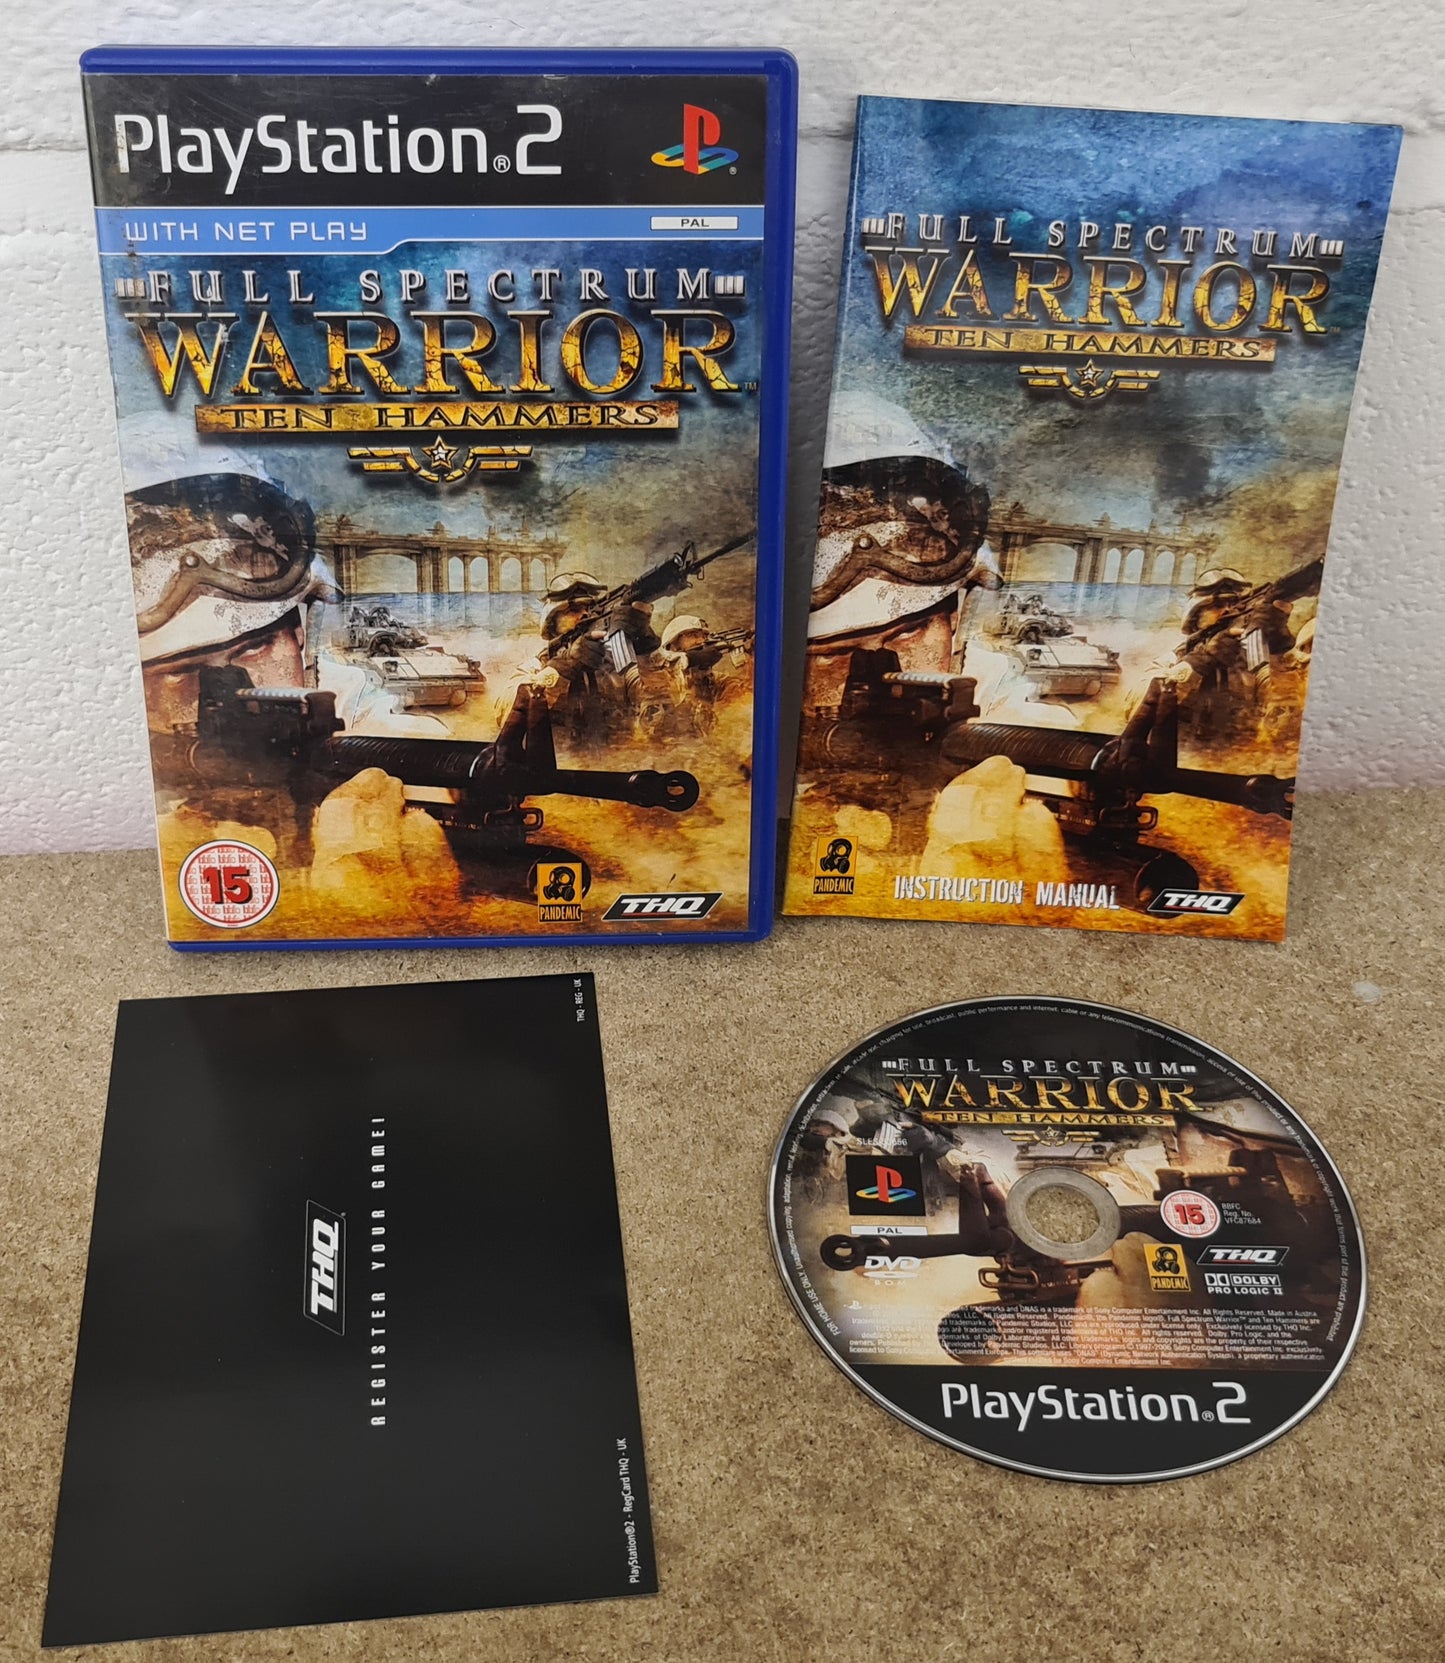 Full Spectrum Warrior Ten Hammers Sony Playstation 2 (PS2) Game